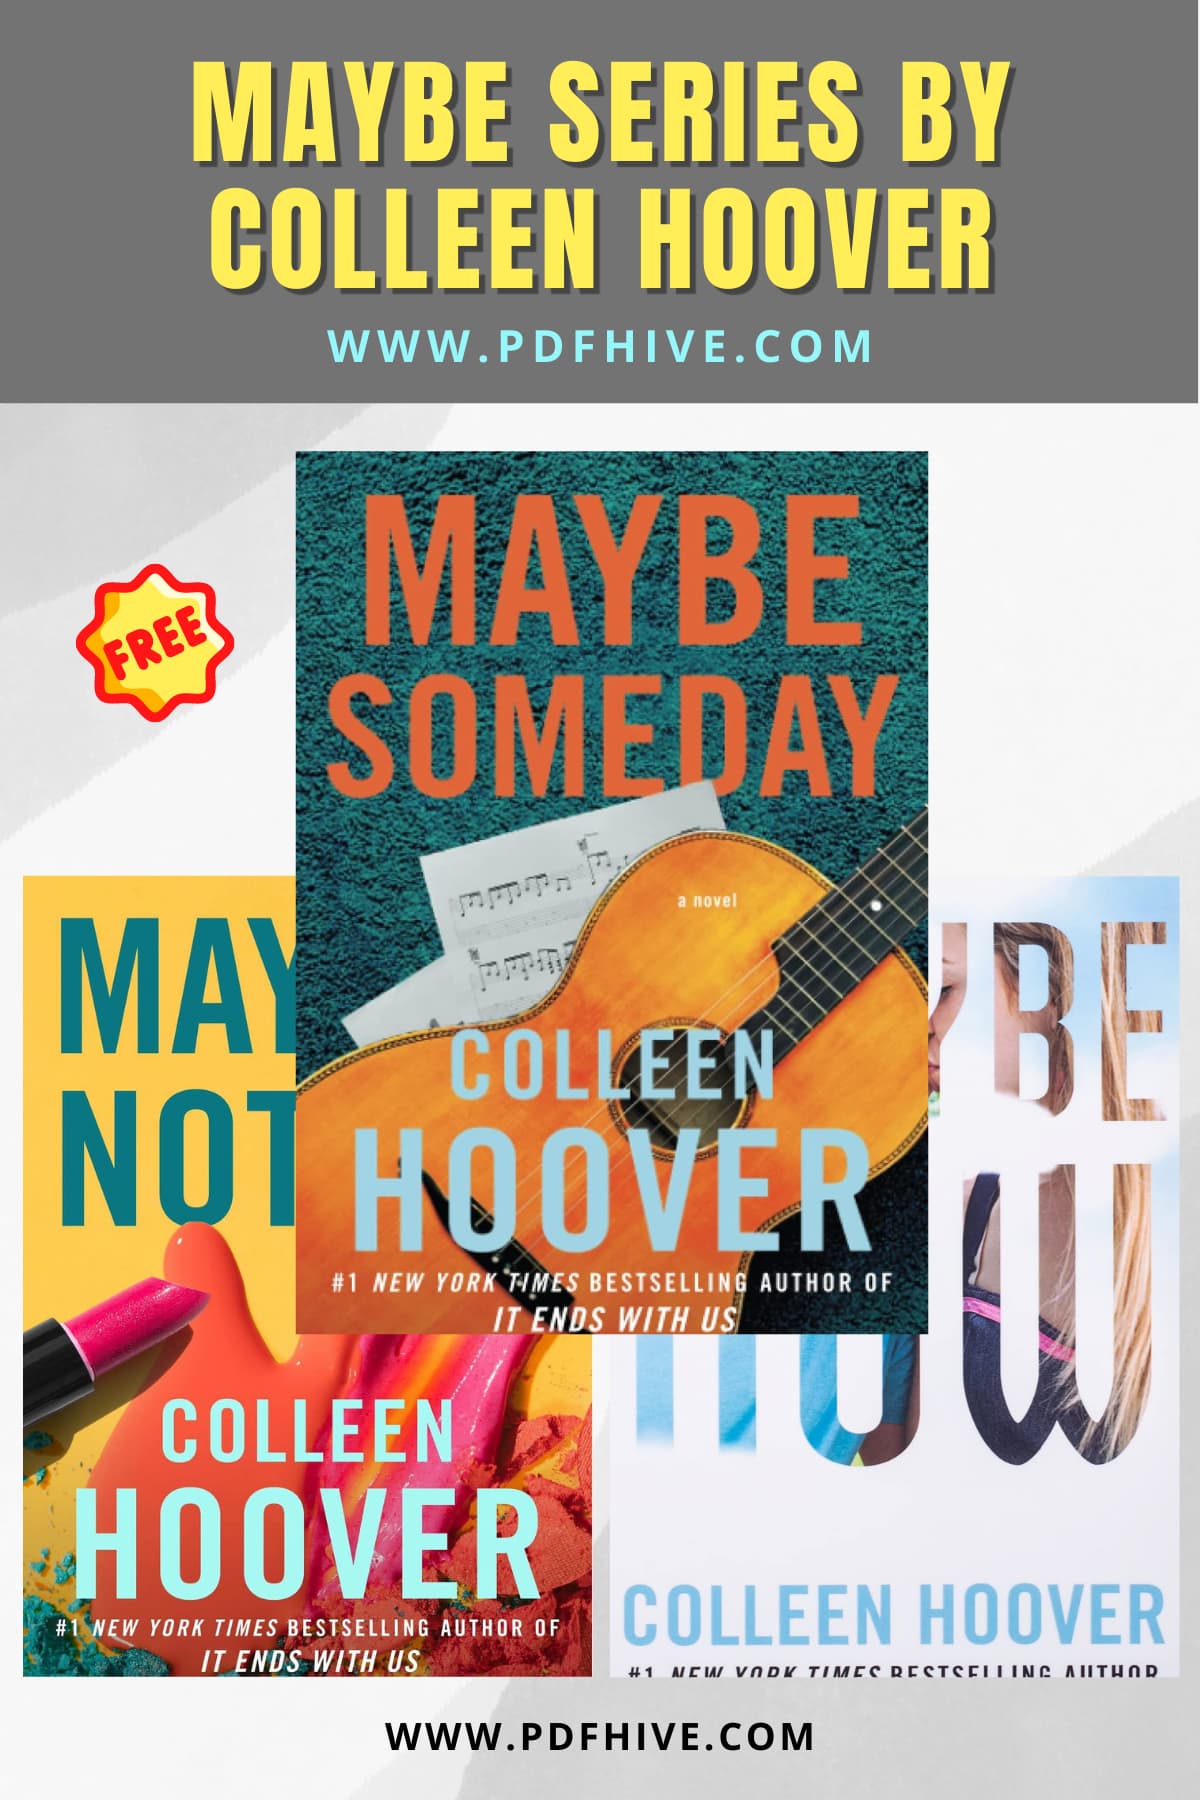 Book Series, Books Series In Order, Colleen Hoover Books In Order, Coming of Age, Contemporary Romance, Fiction, Maybe Books In Order, Maybe series, New Adult Romance, Romance, Women's Fiction